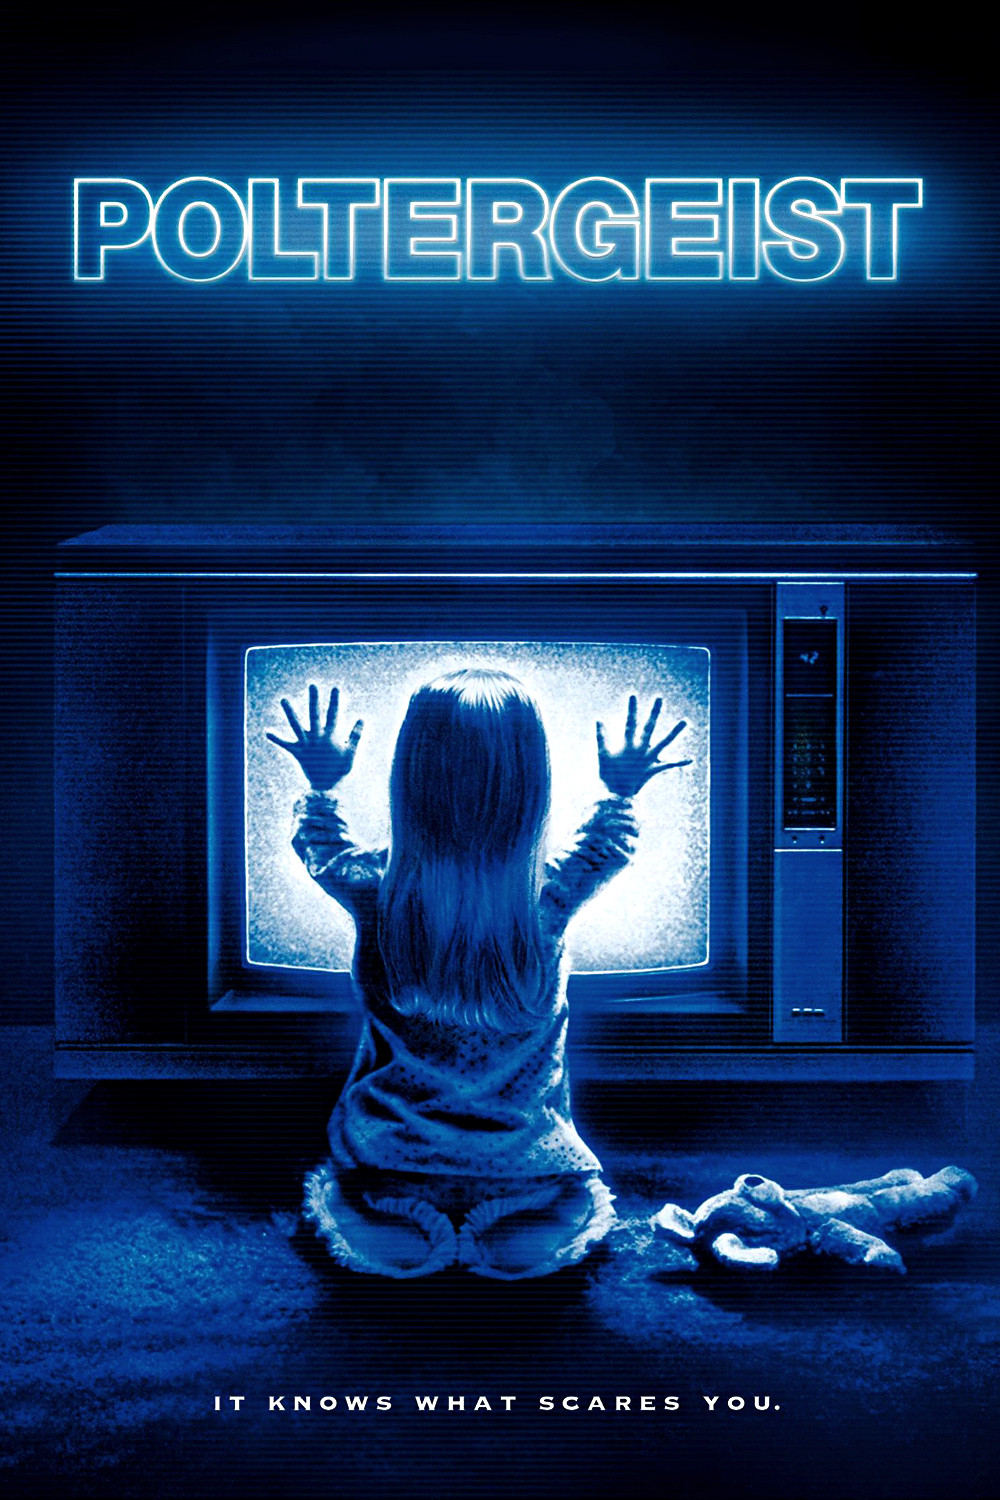 HQ Poltergeist (1982) Wallpapers | File 472.89Kb